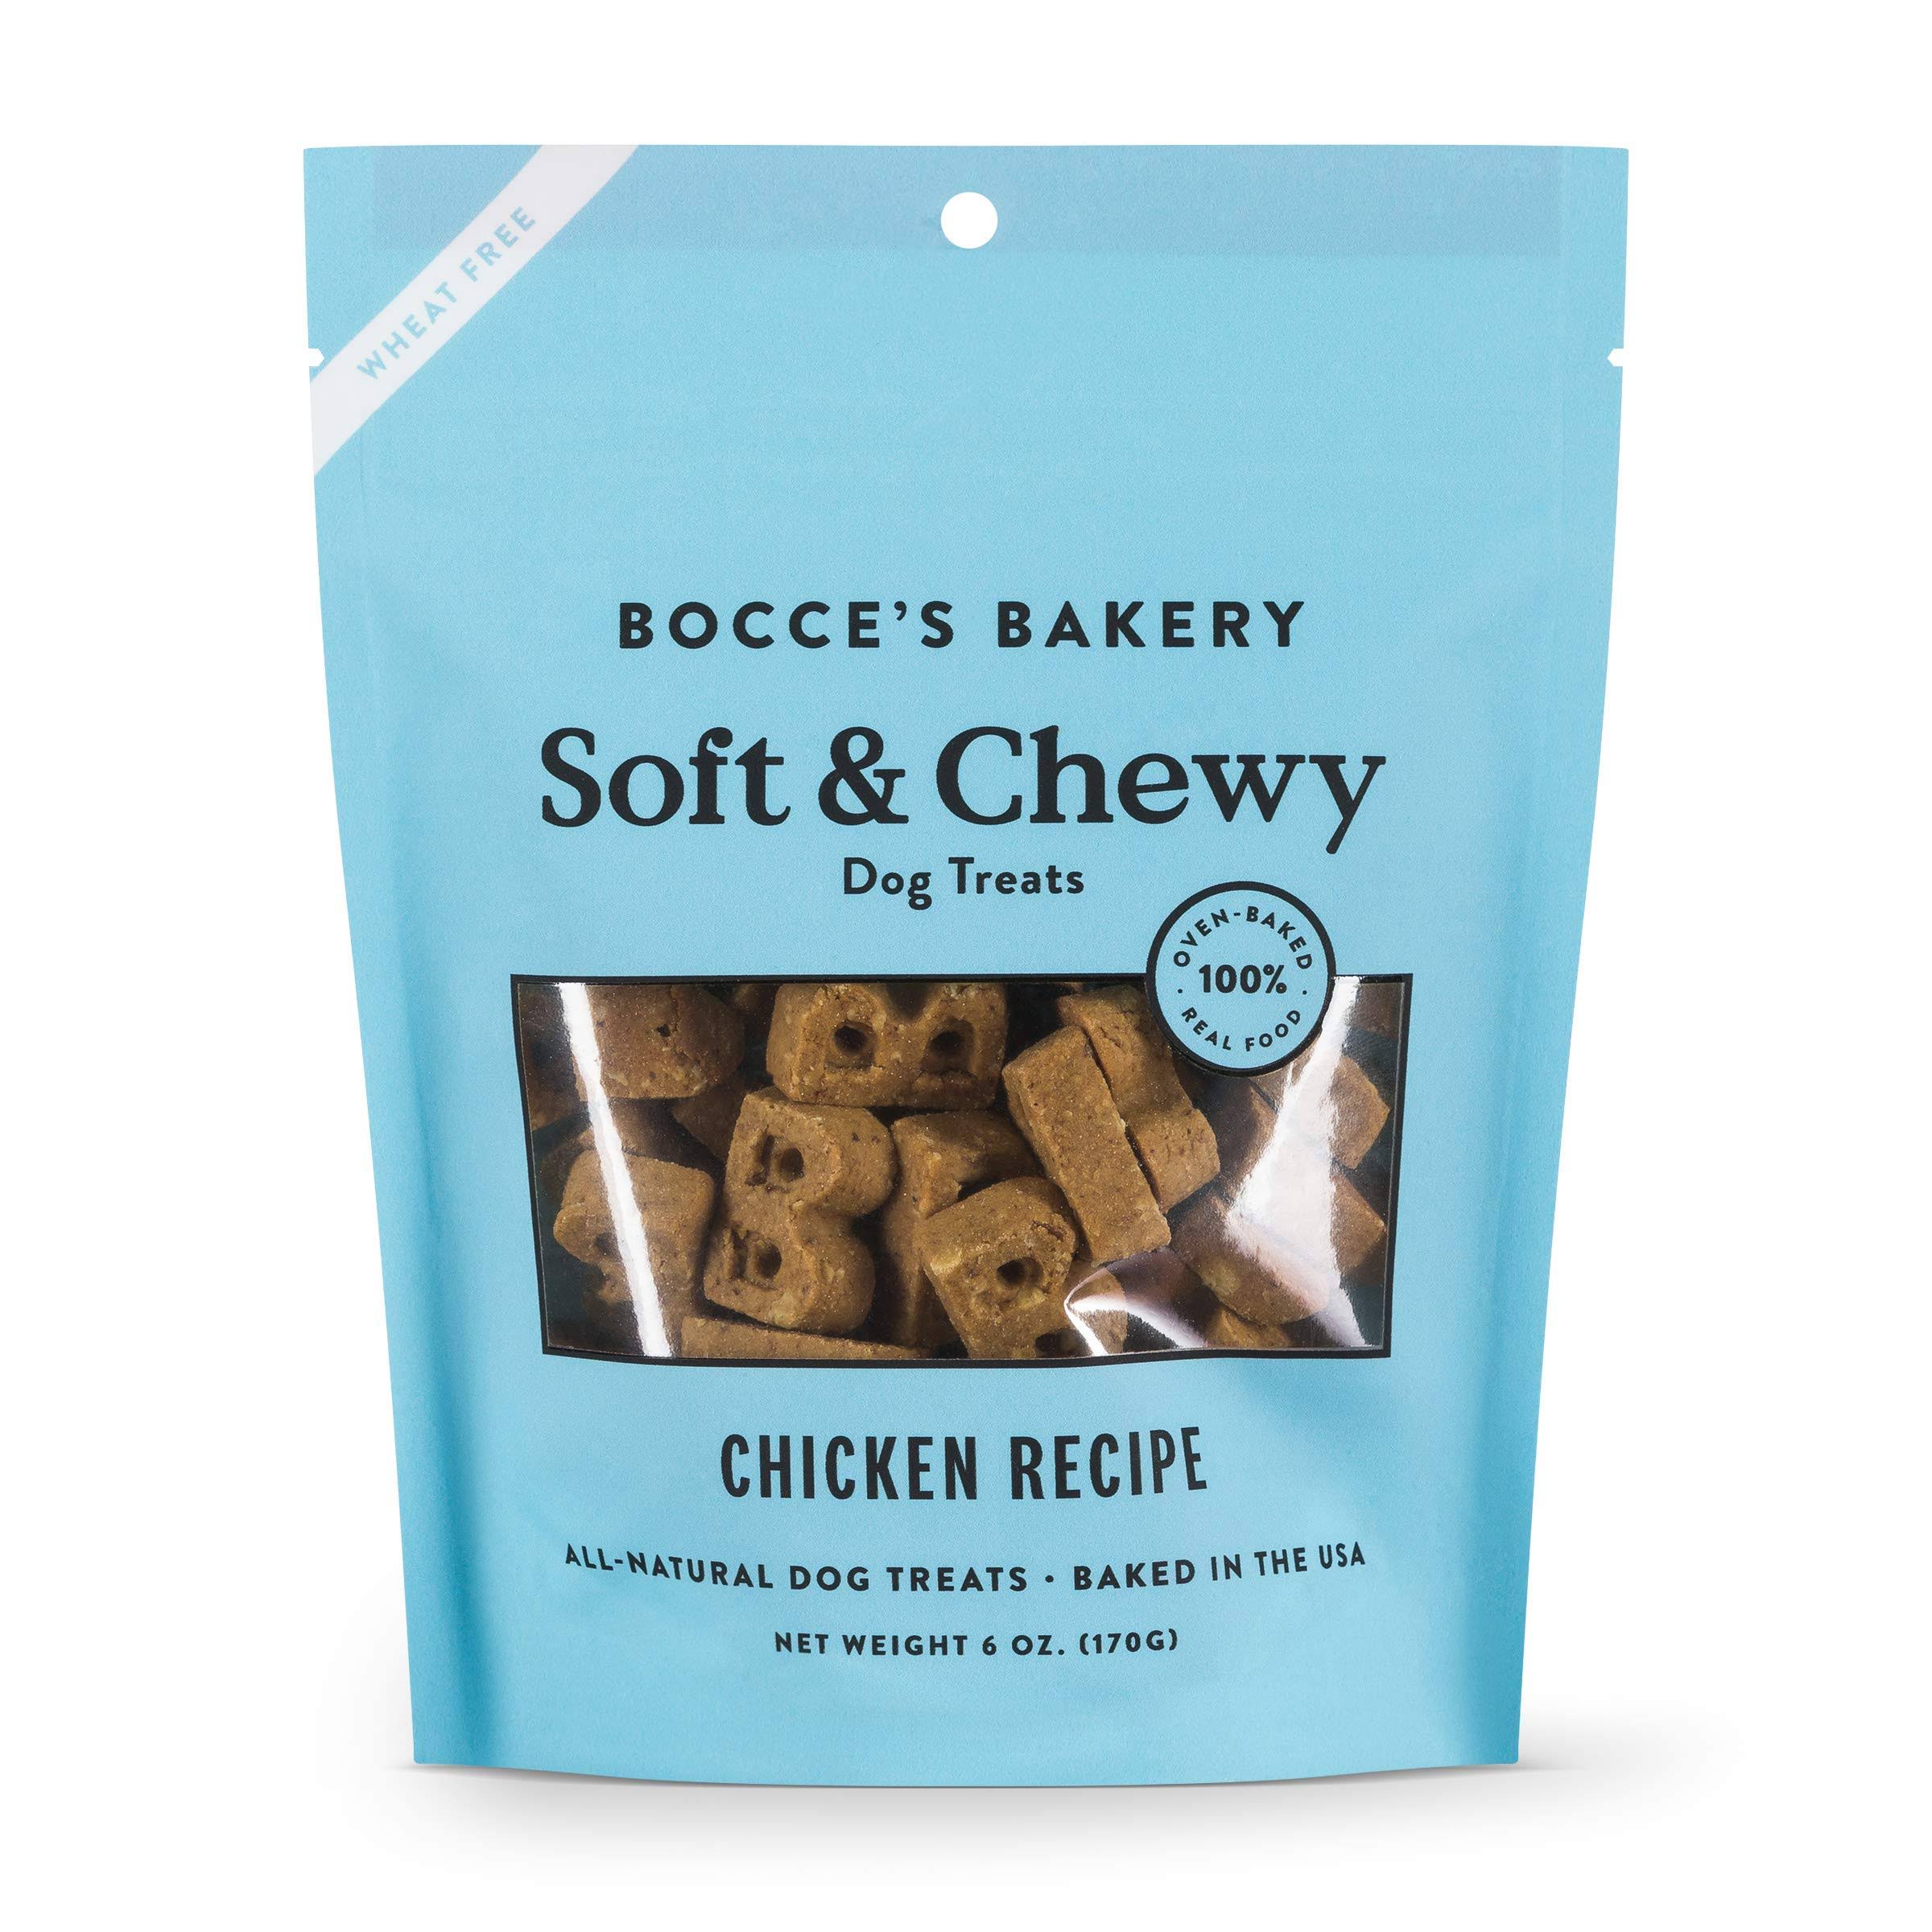 Bocce's Bakery Soft & Chewy Chicken Dog Treats / 6 oz